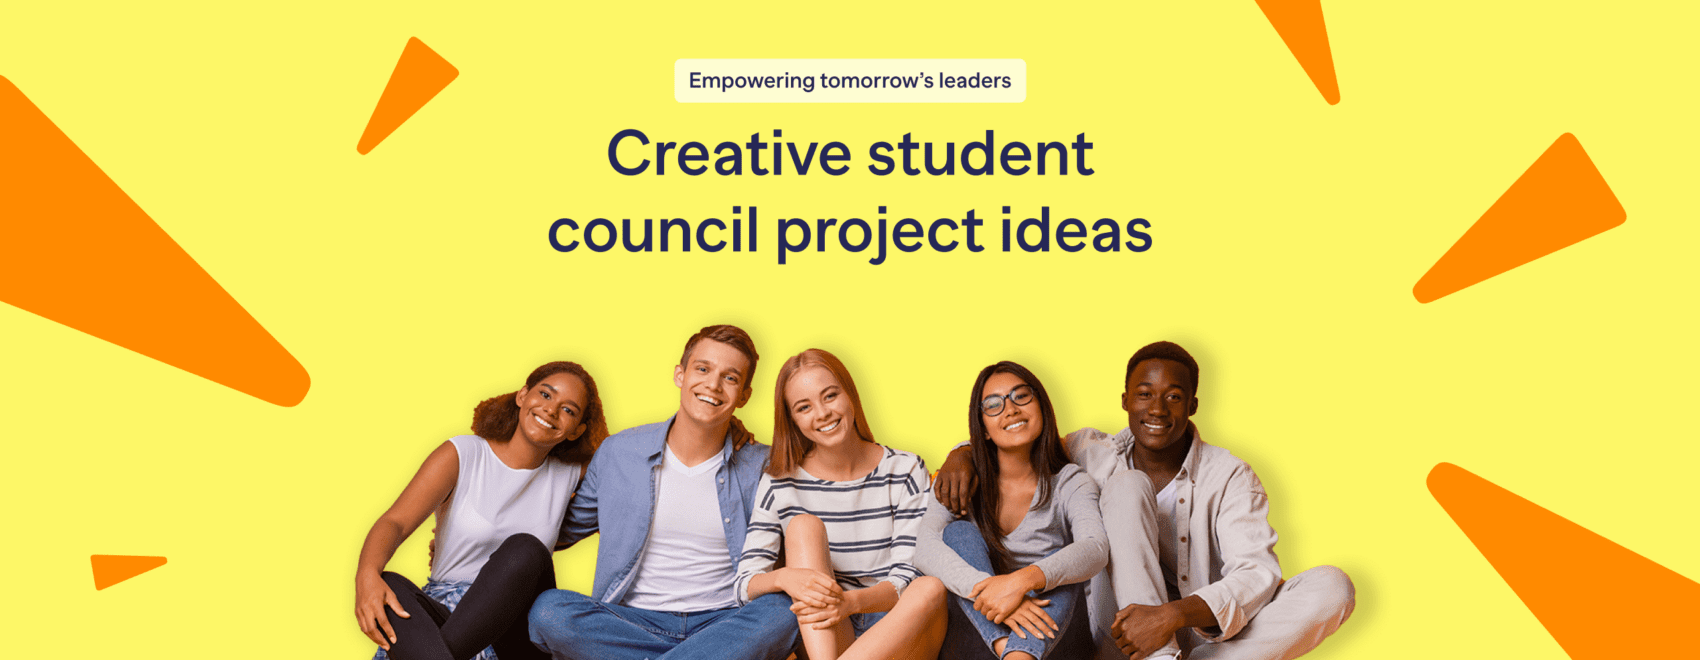 Empowering tomorrow's leaders creative student council project ideas